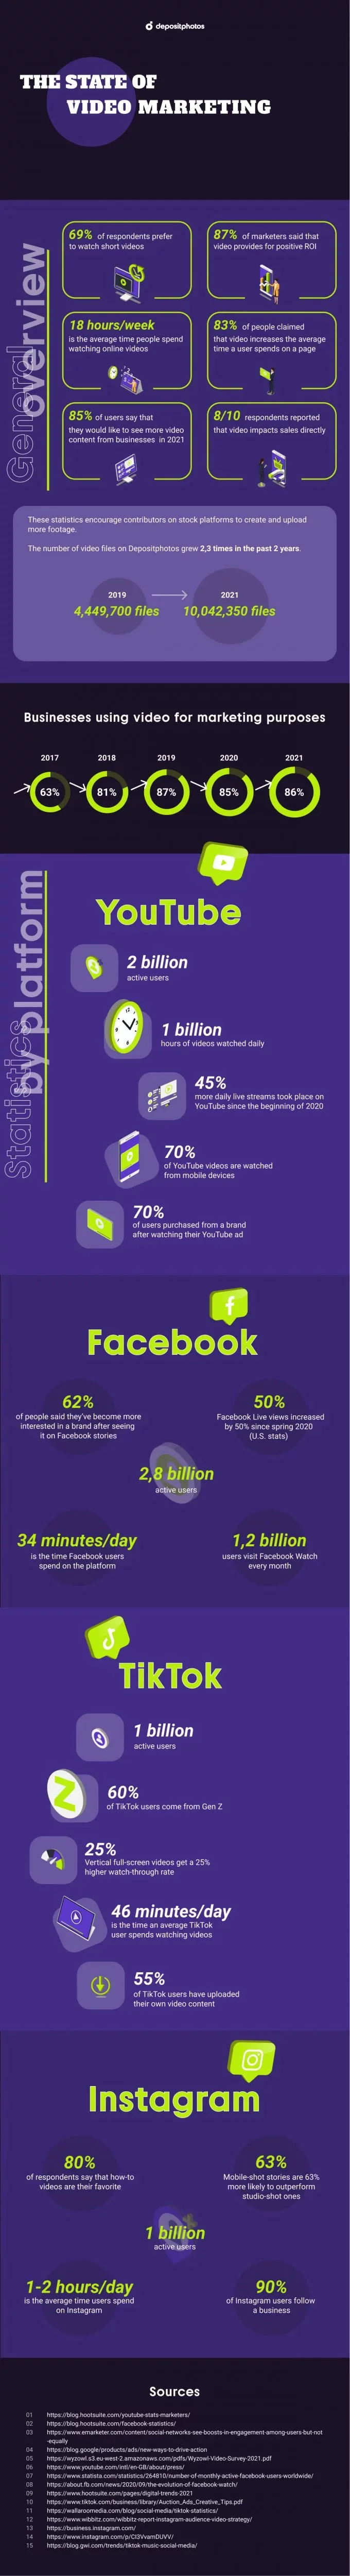 32 social media video marketing stats you need to know in 2022 infographic